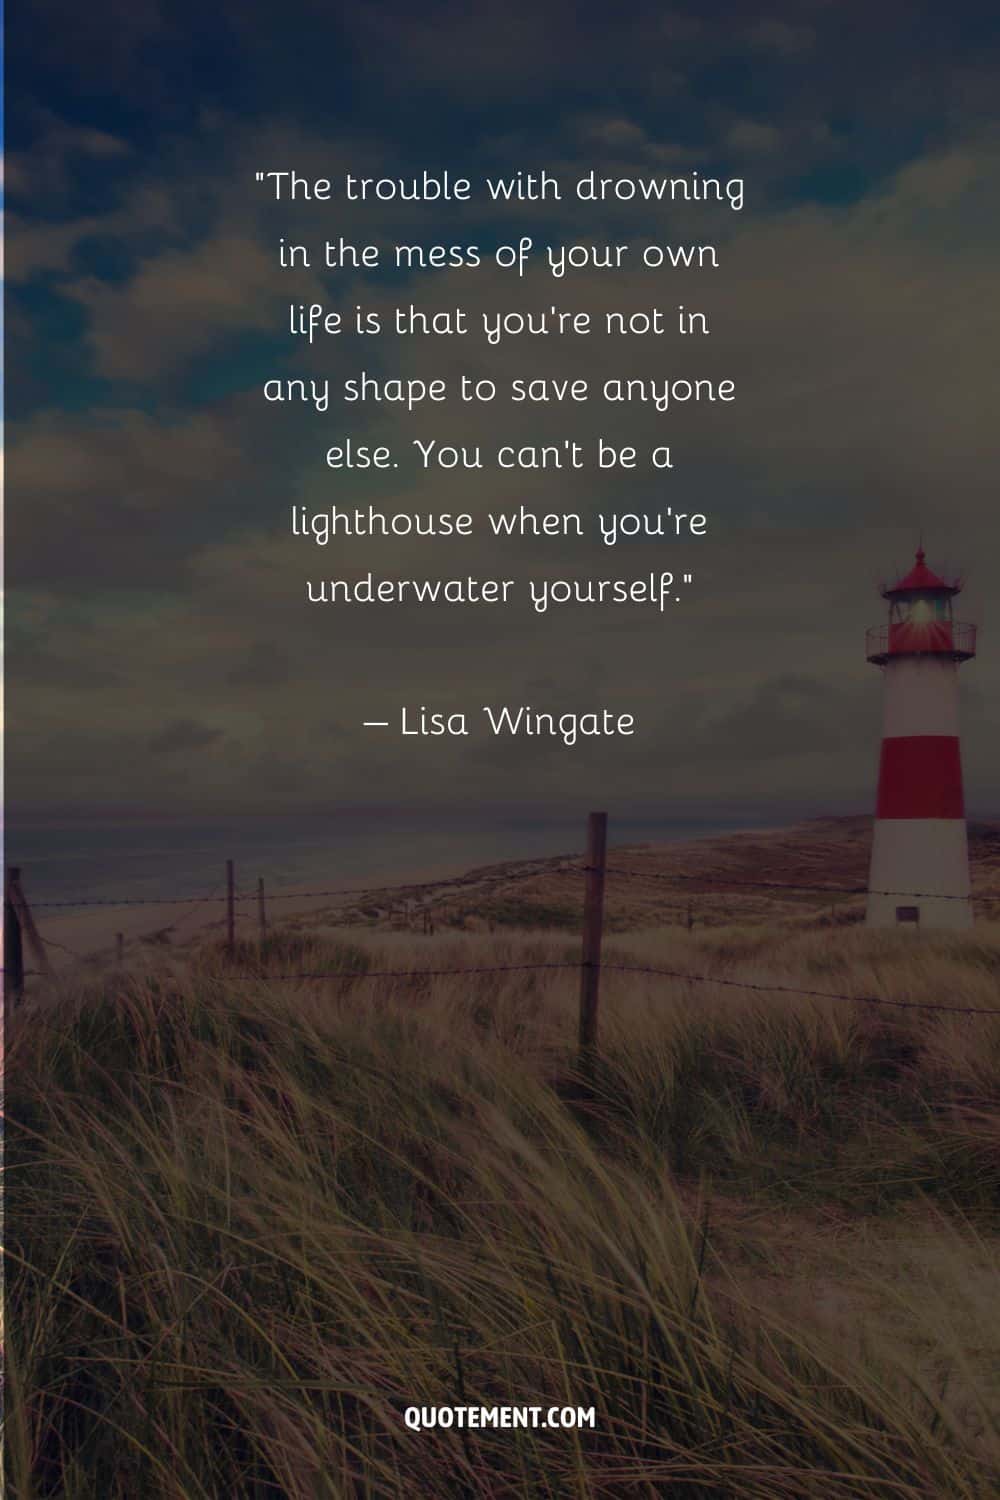 Motivational and eye-opening quote by Lisa Wingate and a lighthouse in the background